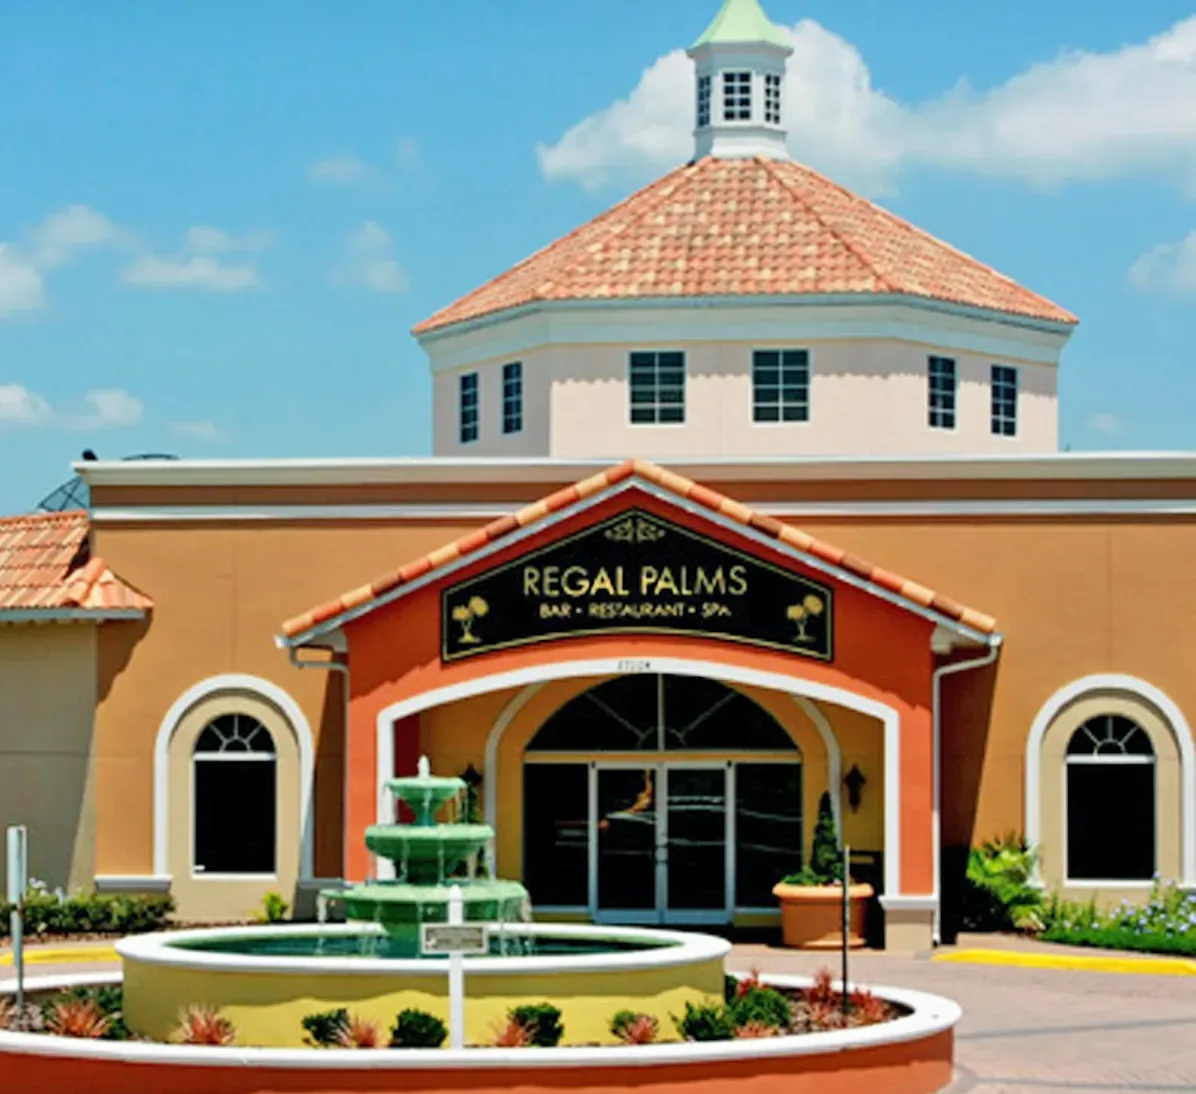 Townhomes at Regal Palms for sale